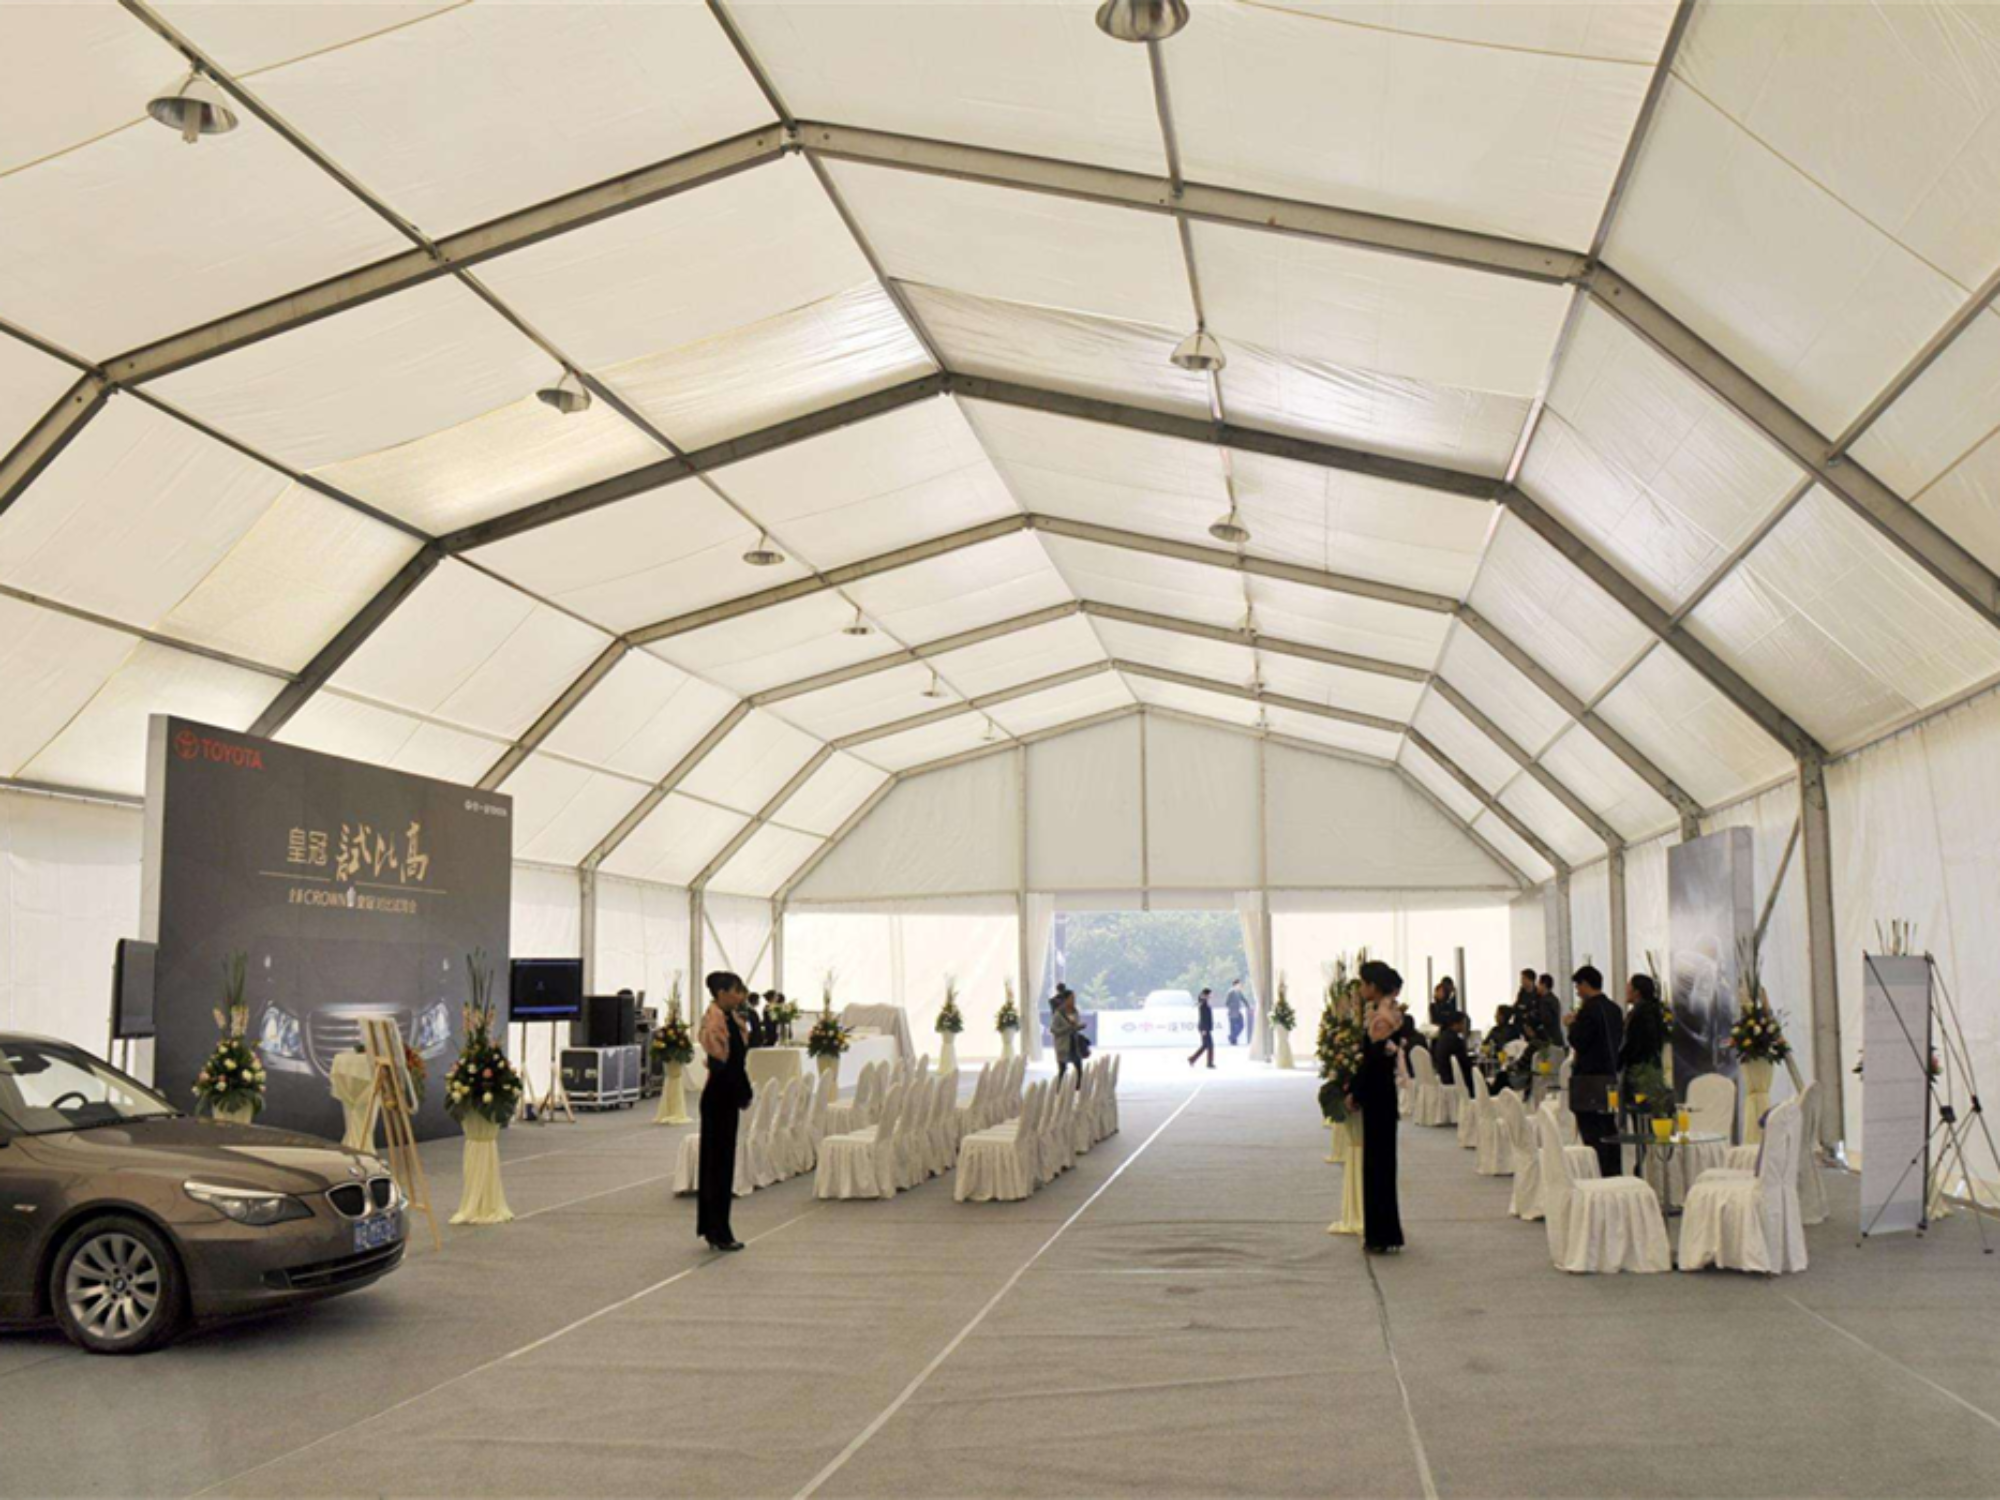 Large Tents For Event Frame Tents Aluminum Exhibitions Polygonal Tents